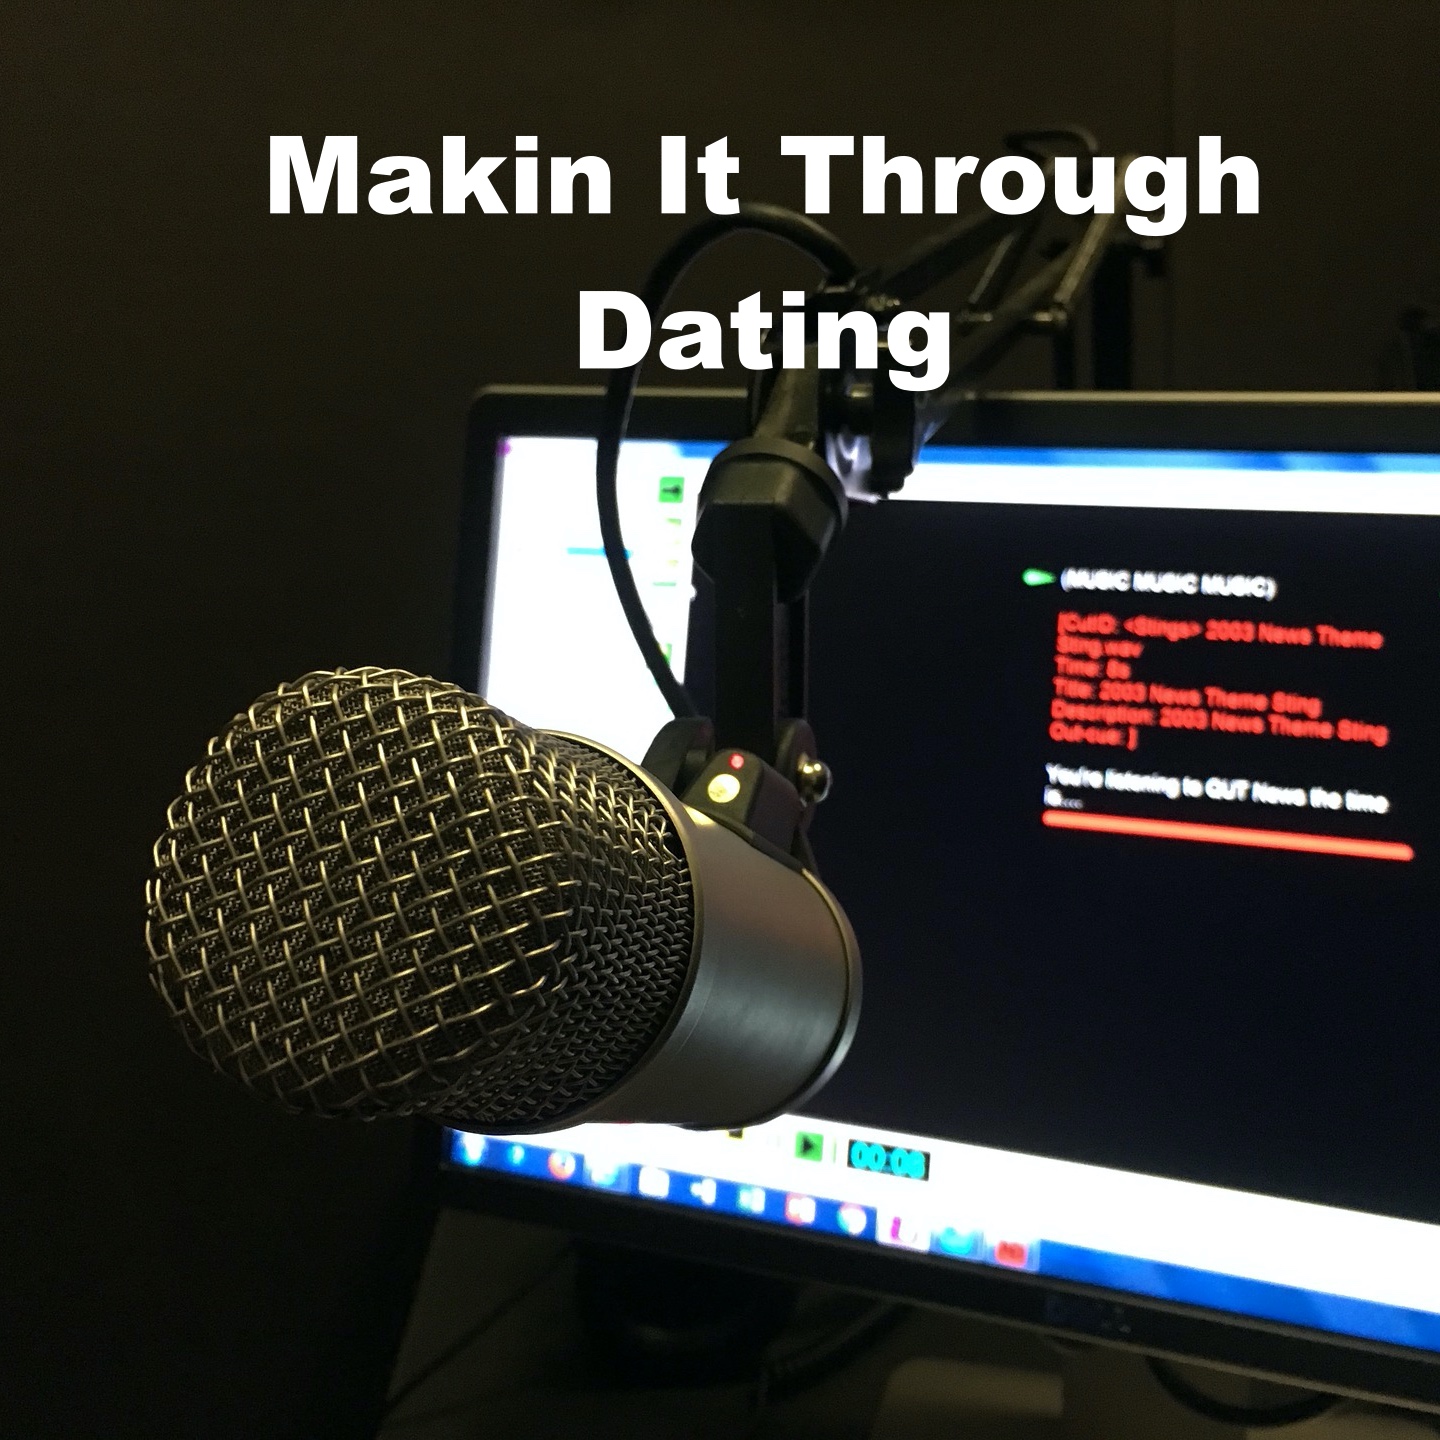 Podcast: “Makin It Through Dating: